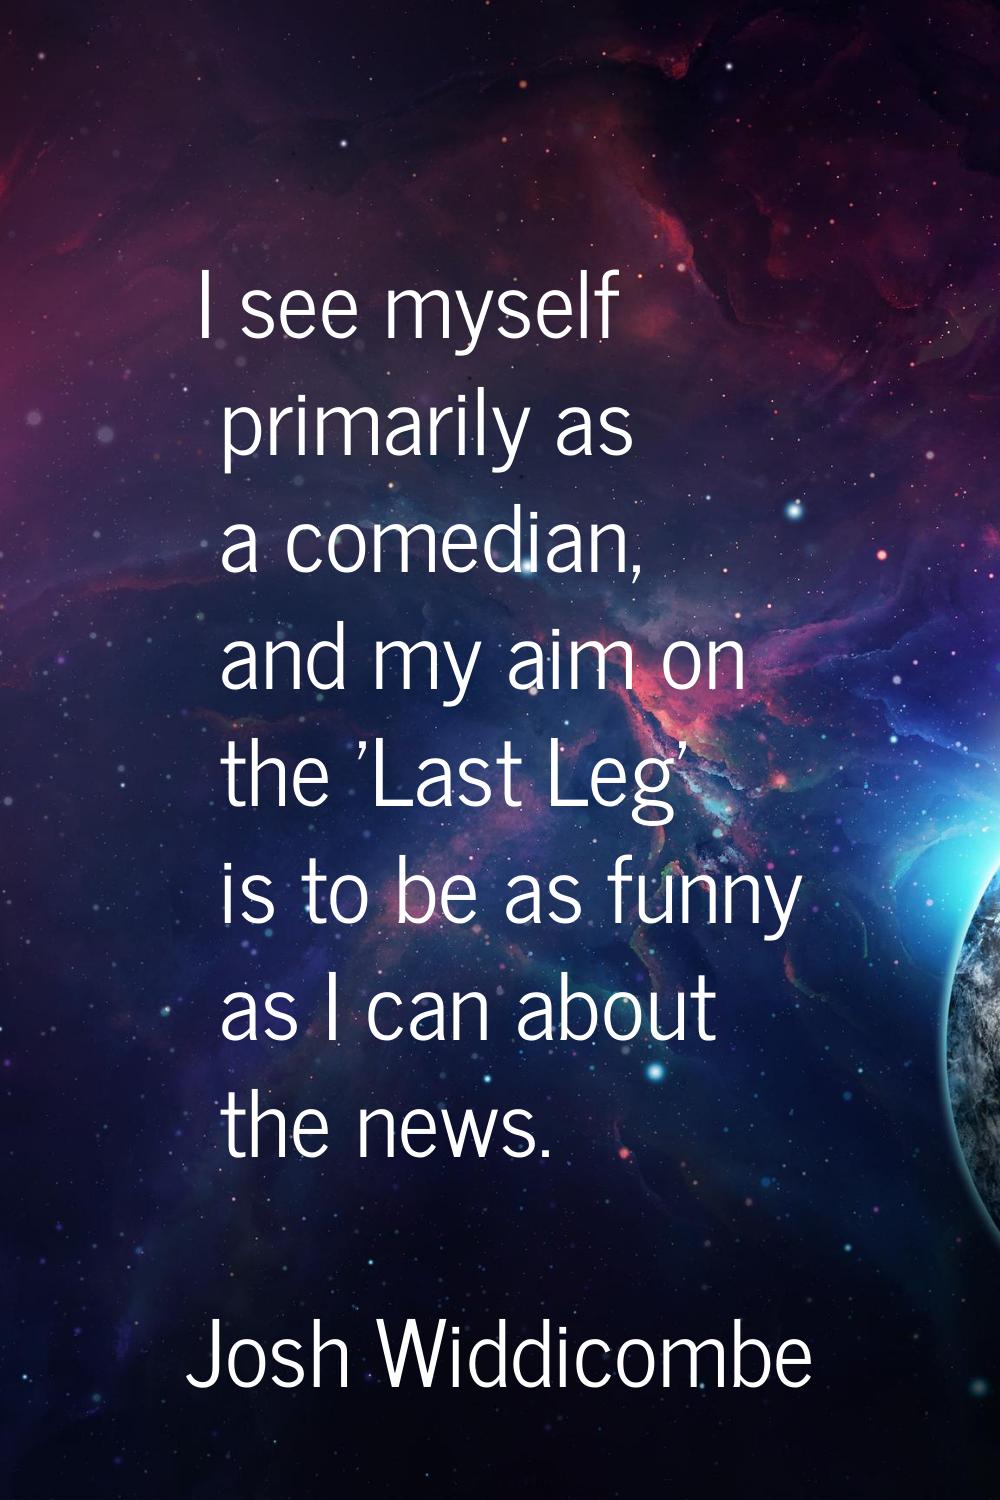 I see myself primarily as a comedian, and my aim on the 'Last Leg' is to be as funny as I can about